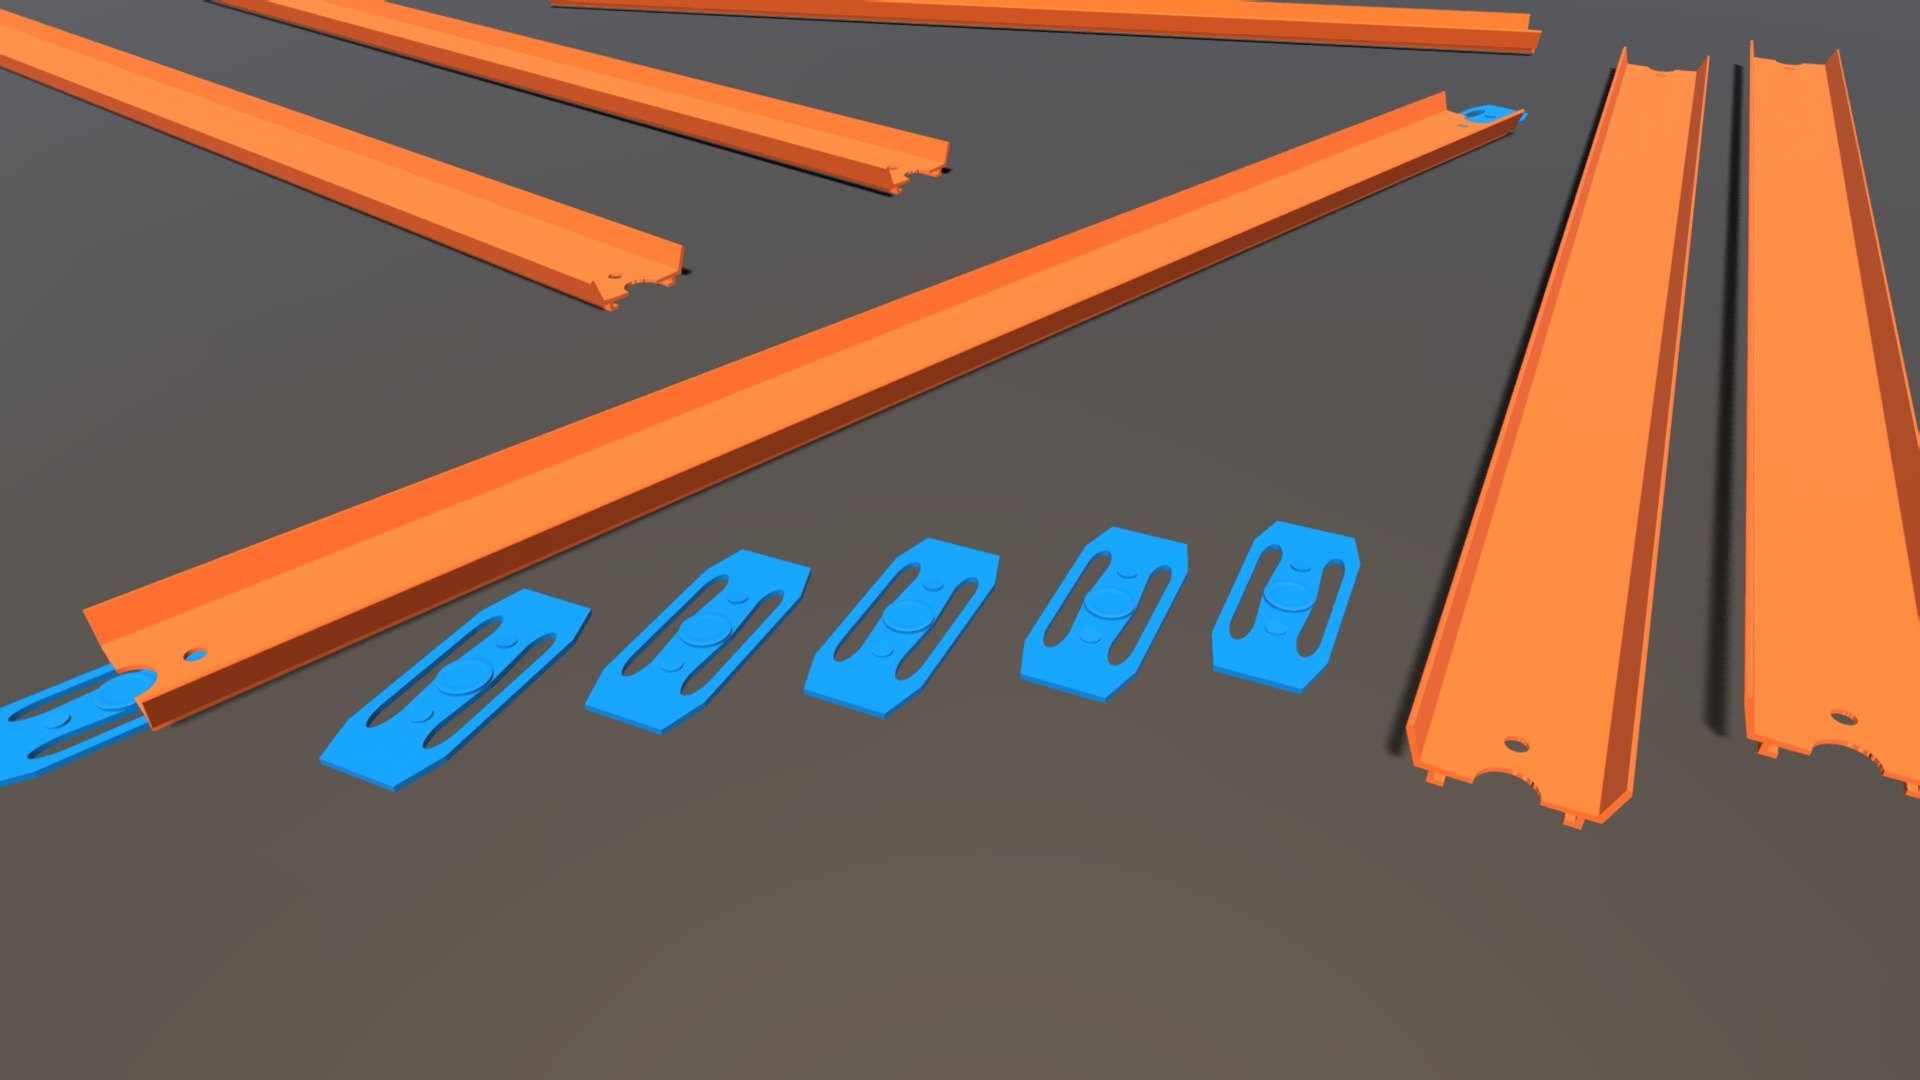 This is a toy track for diecast model cars. They are sold under various brand names in the childrens industry, but I can't add the name directly without indorsement. This is a low poly true to scale track package with several lengths of track and connectors included. 

These can easily be duplicated in your game or video as many times as you like. The models were made in Blender3D.

If you use this in your game or project, please let me know so I can see it in action 3d model